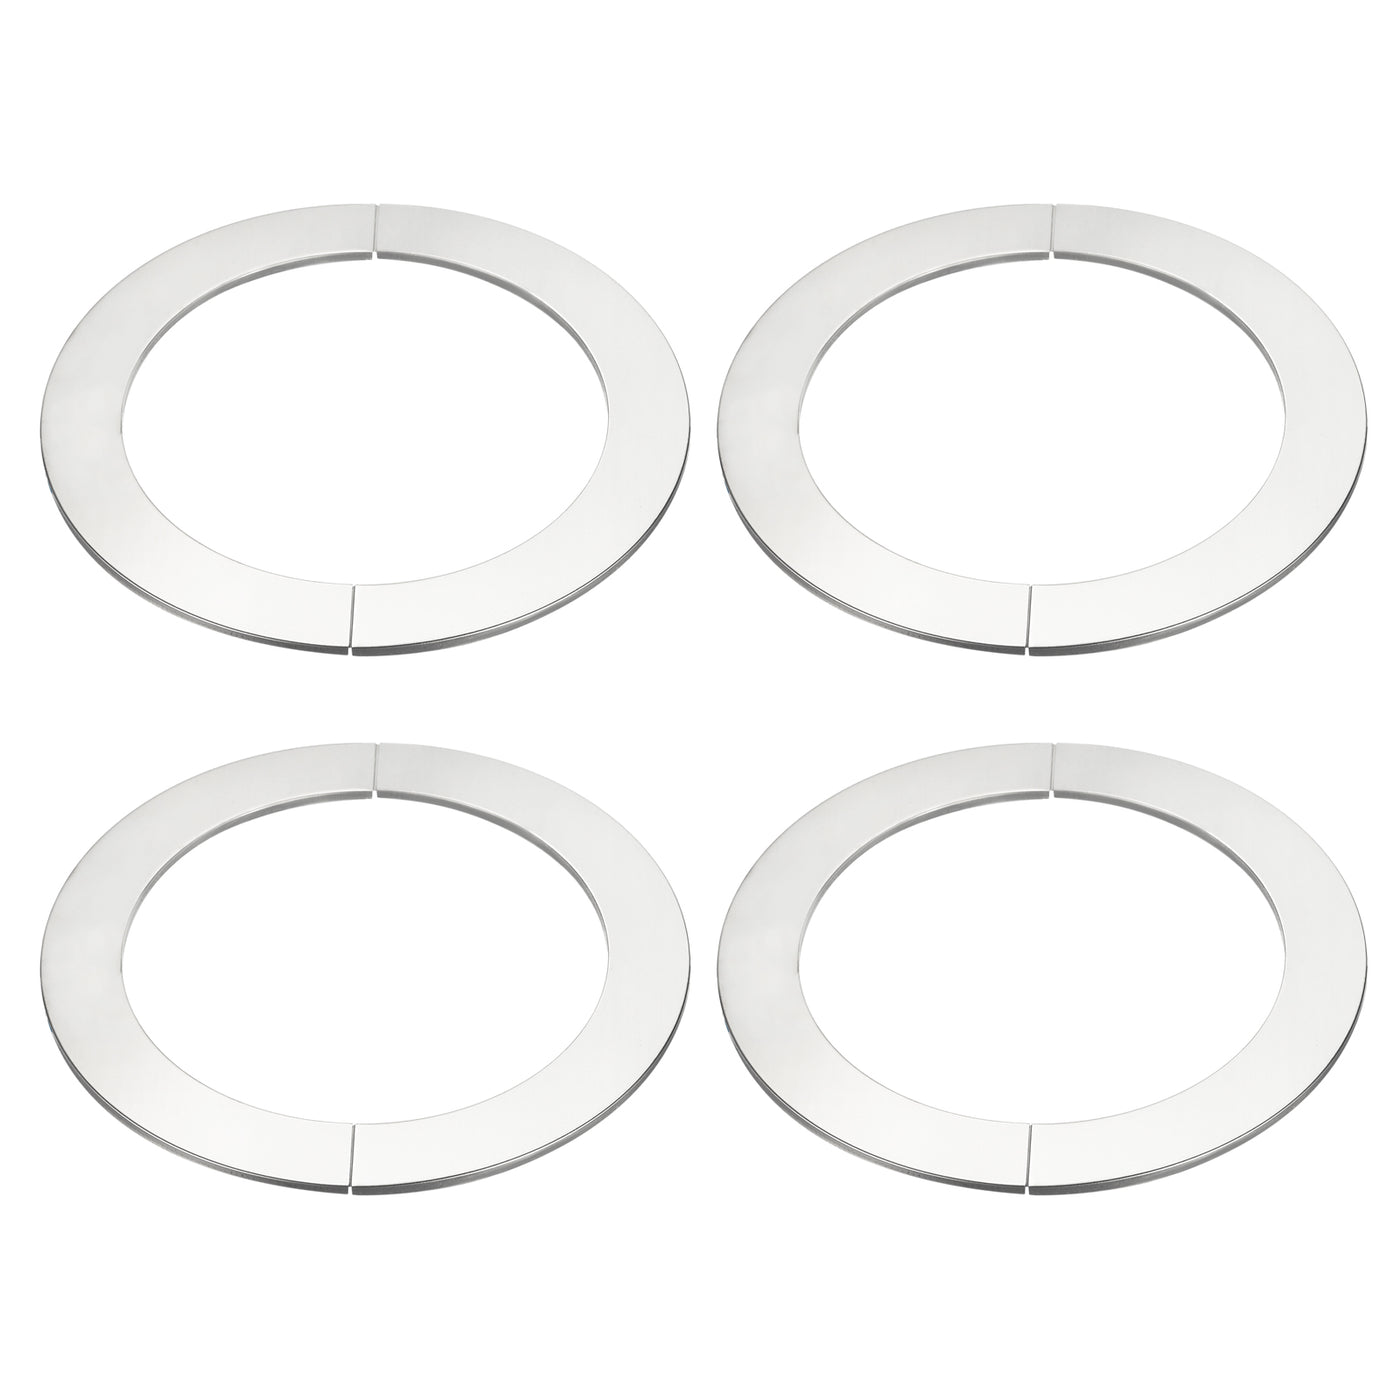 Uxcell Uxcell Wall Split Flange, 201 Stainless Steel Round Escutcheon Plate for 181mm Diameter Pipe 4Pcs